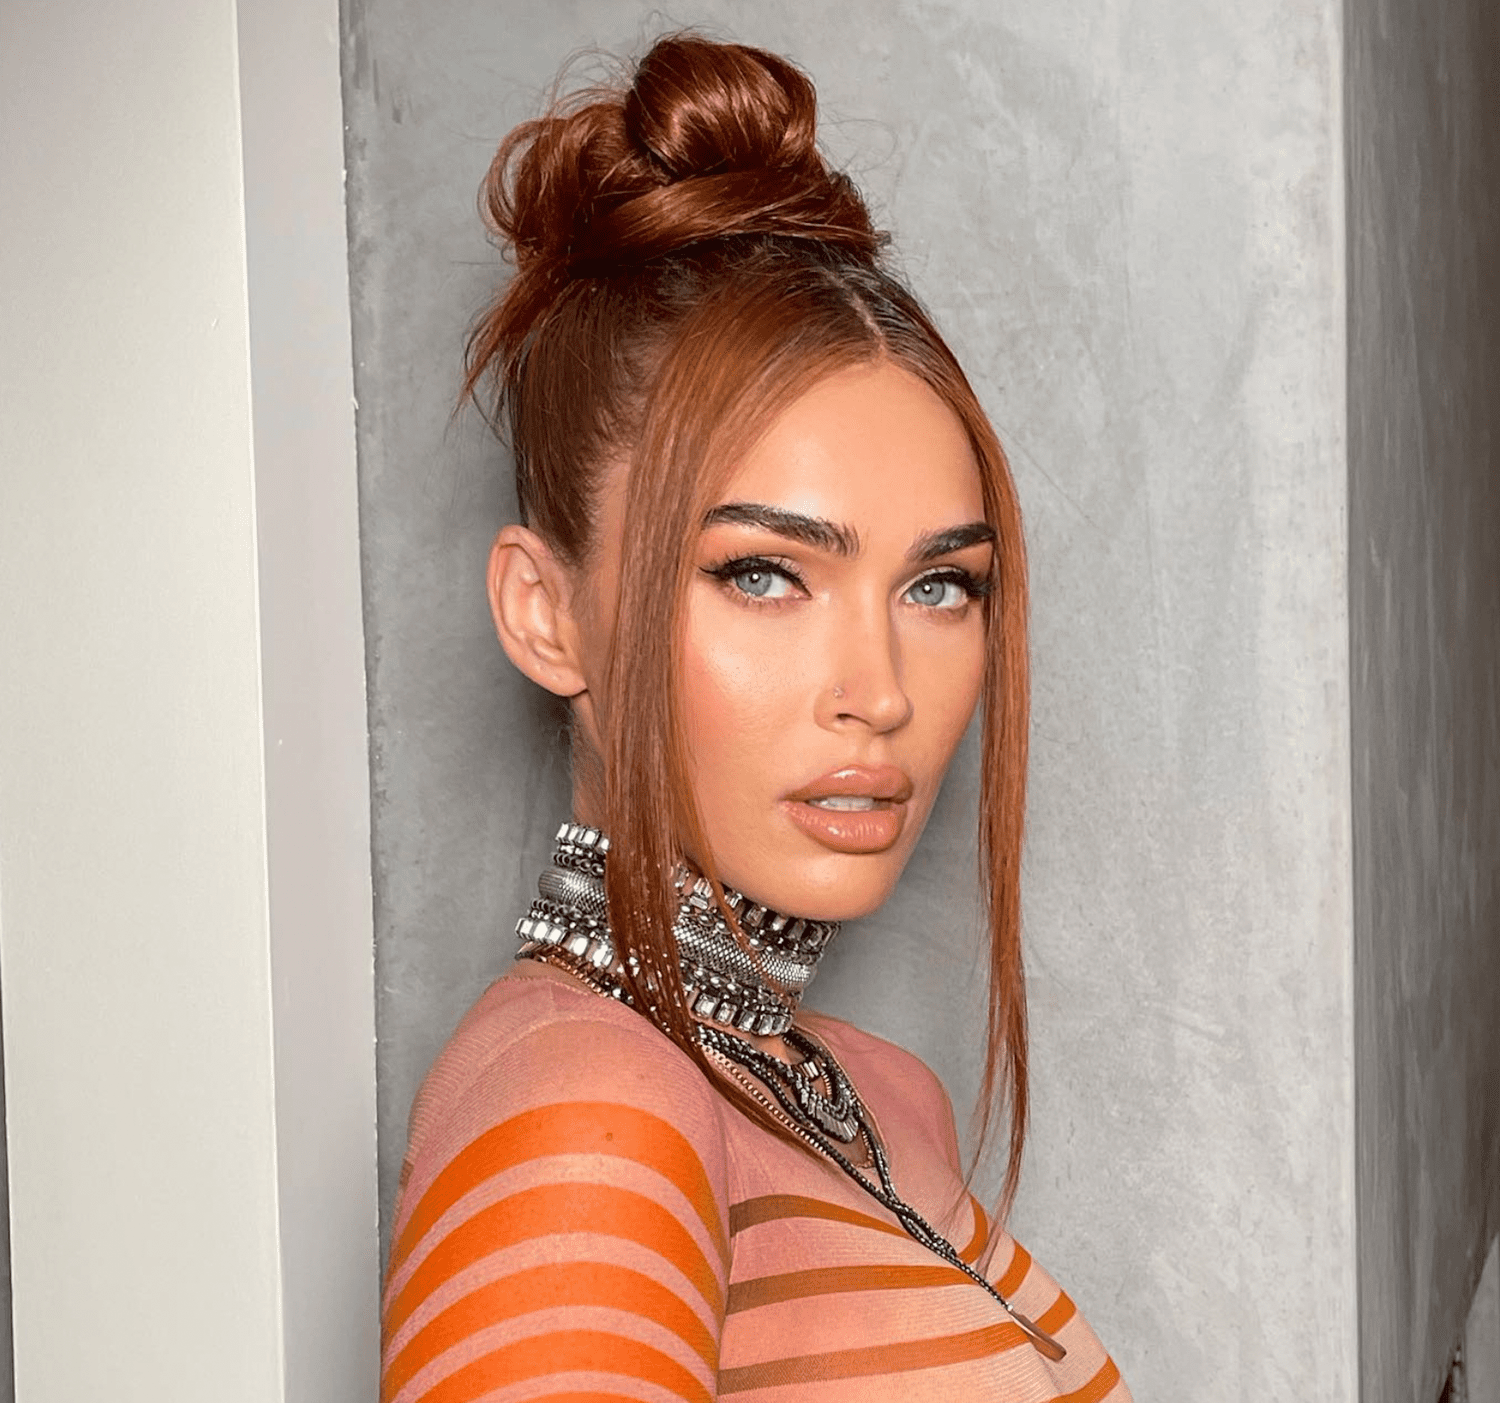 MEGAN FOX IN A SNATCHED TOP KNOT AND STACKED CHOKERS POSING FOR THE CAMERA